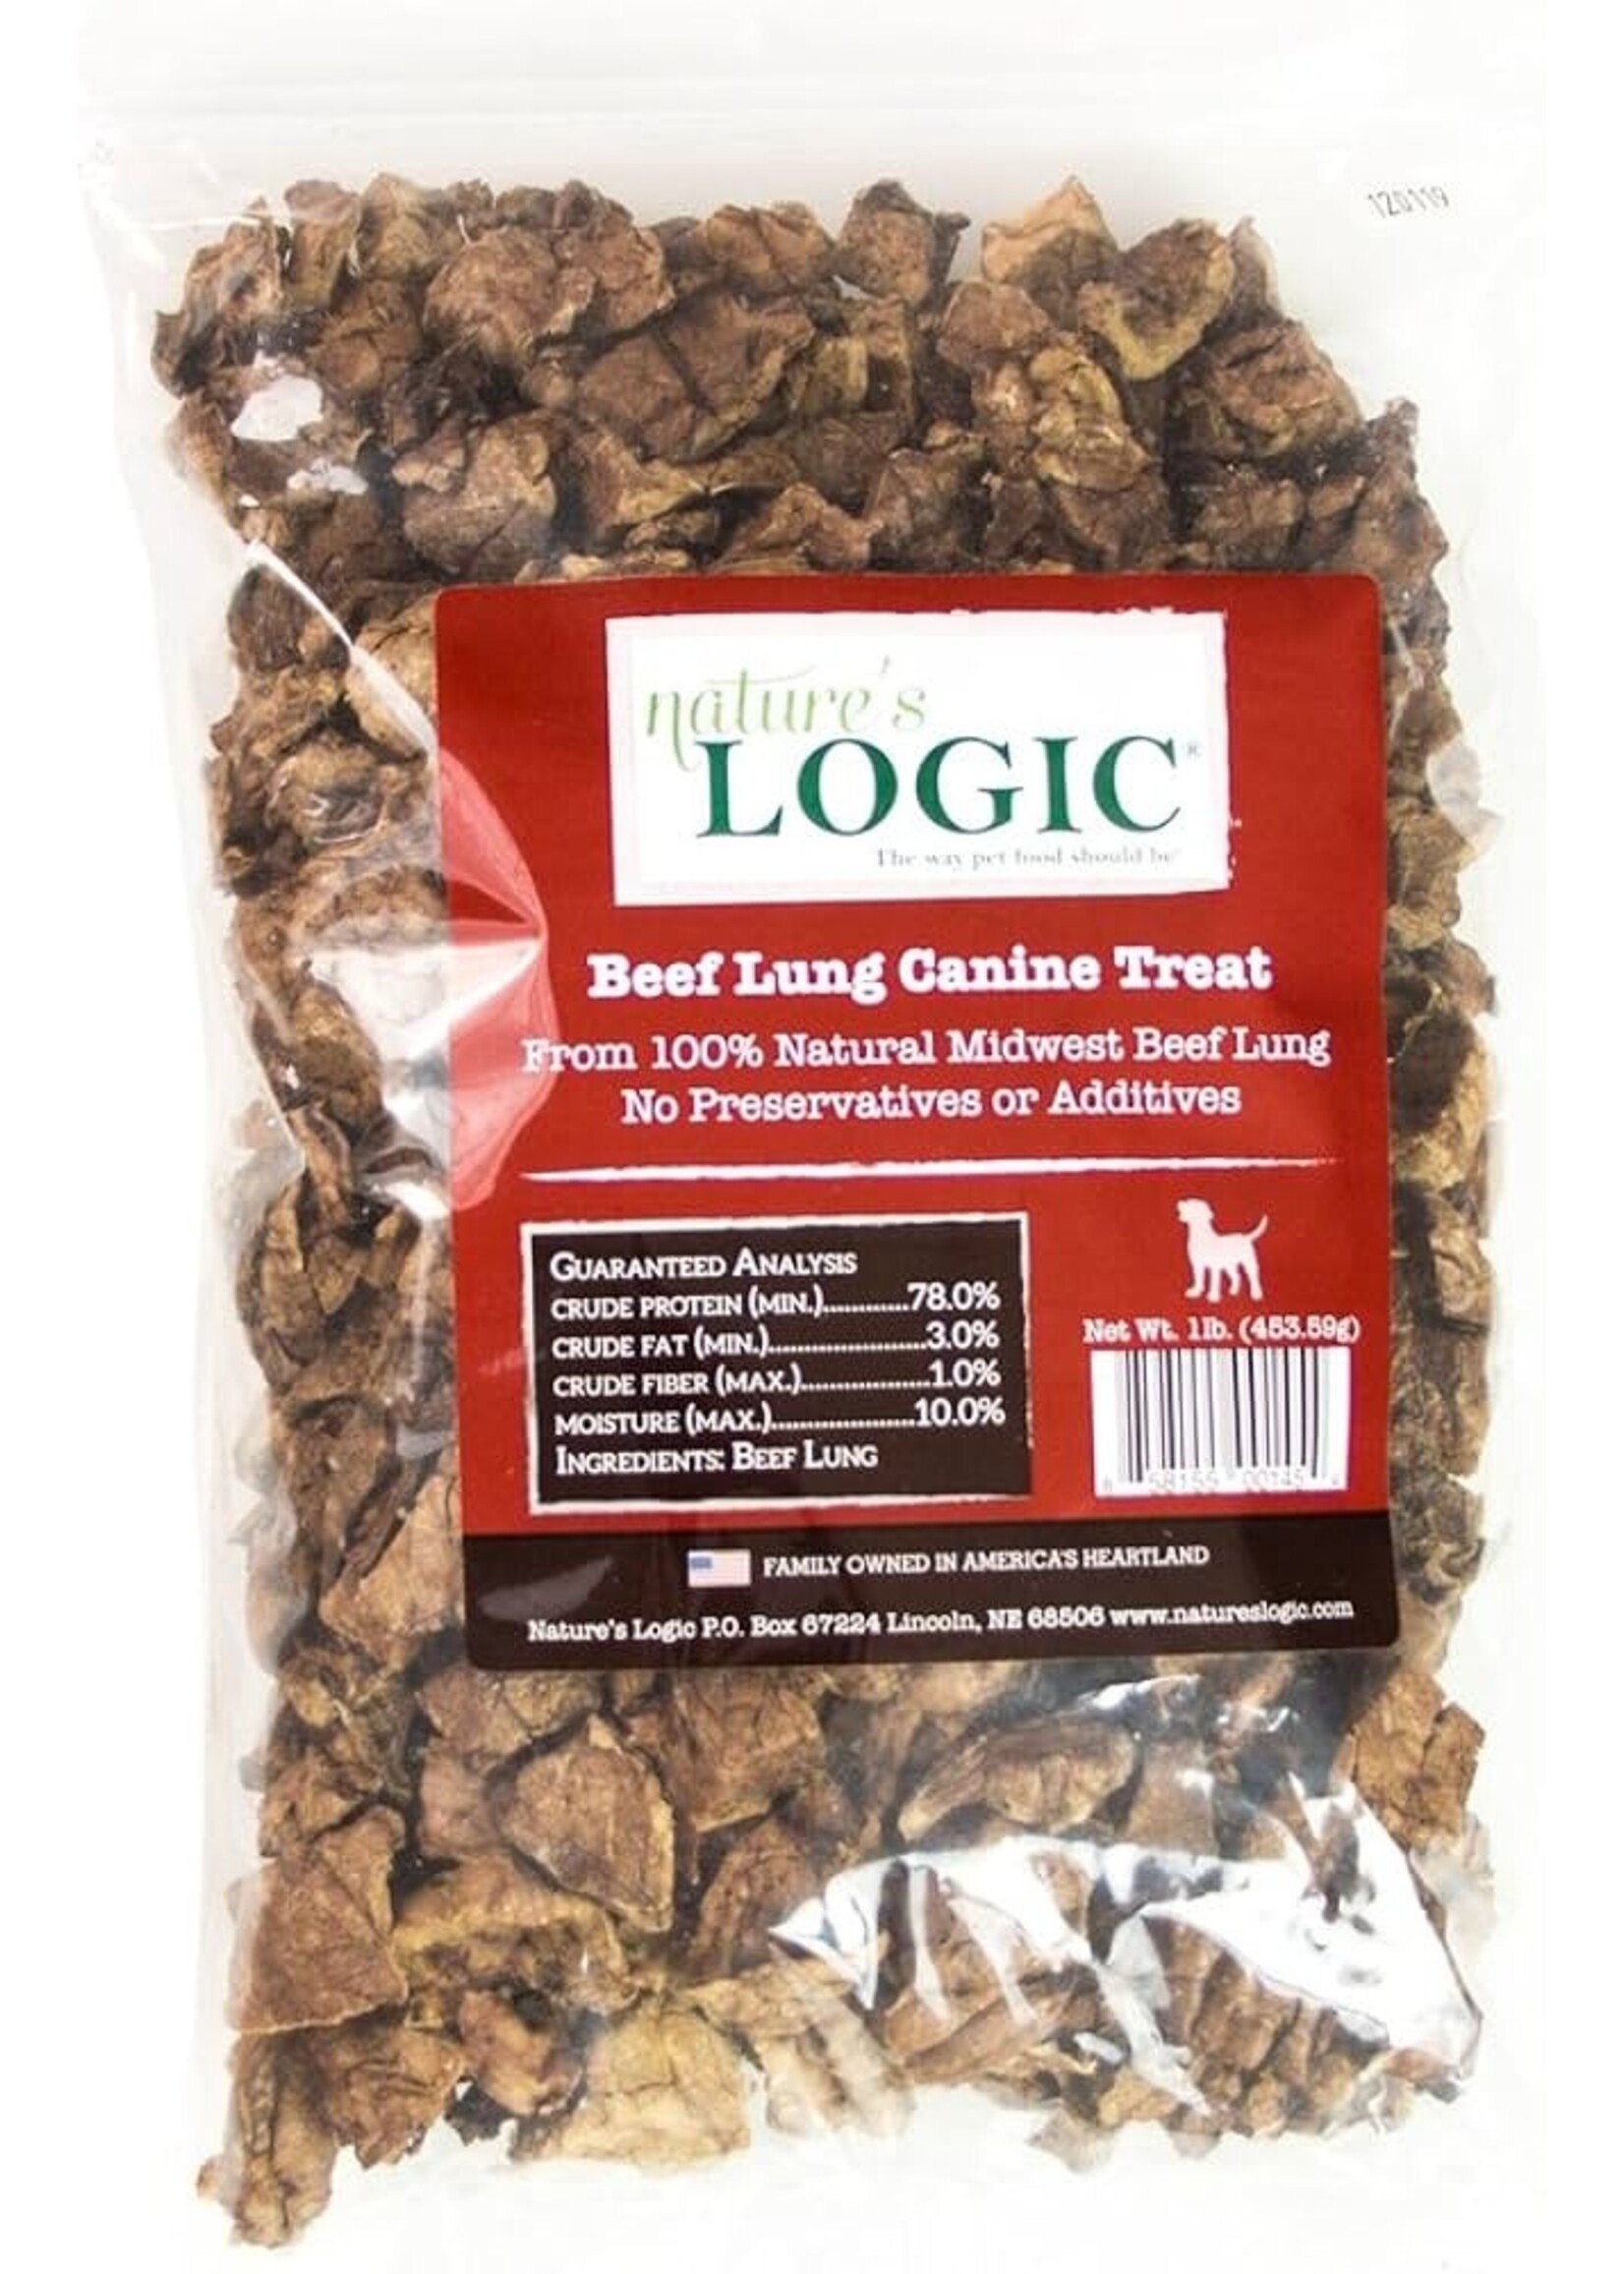 Nature's Logic Beef Lung Canine Dog Treat 1 lb